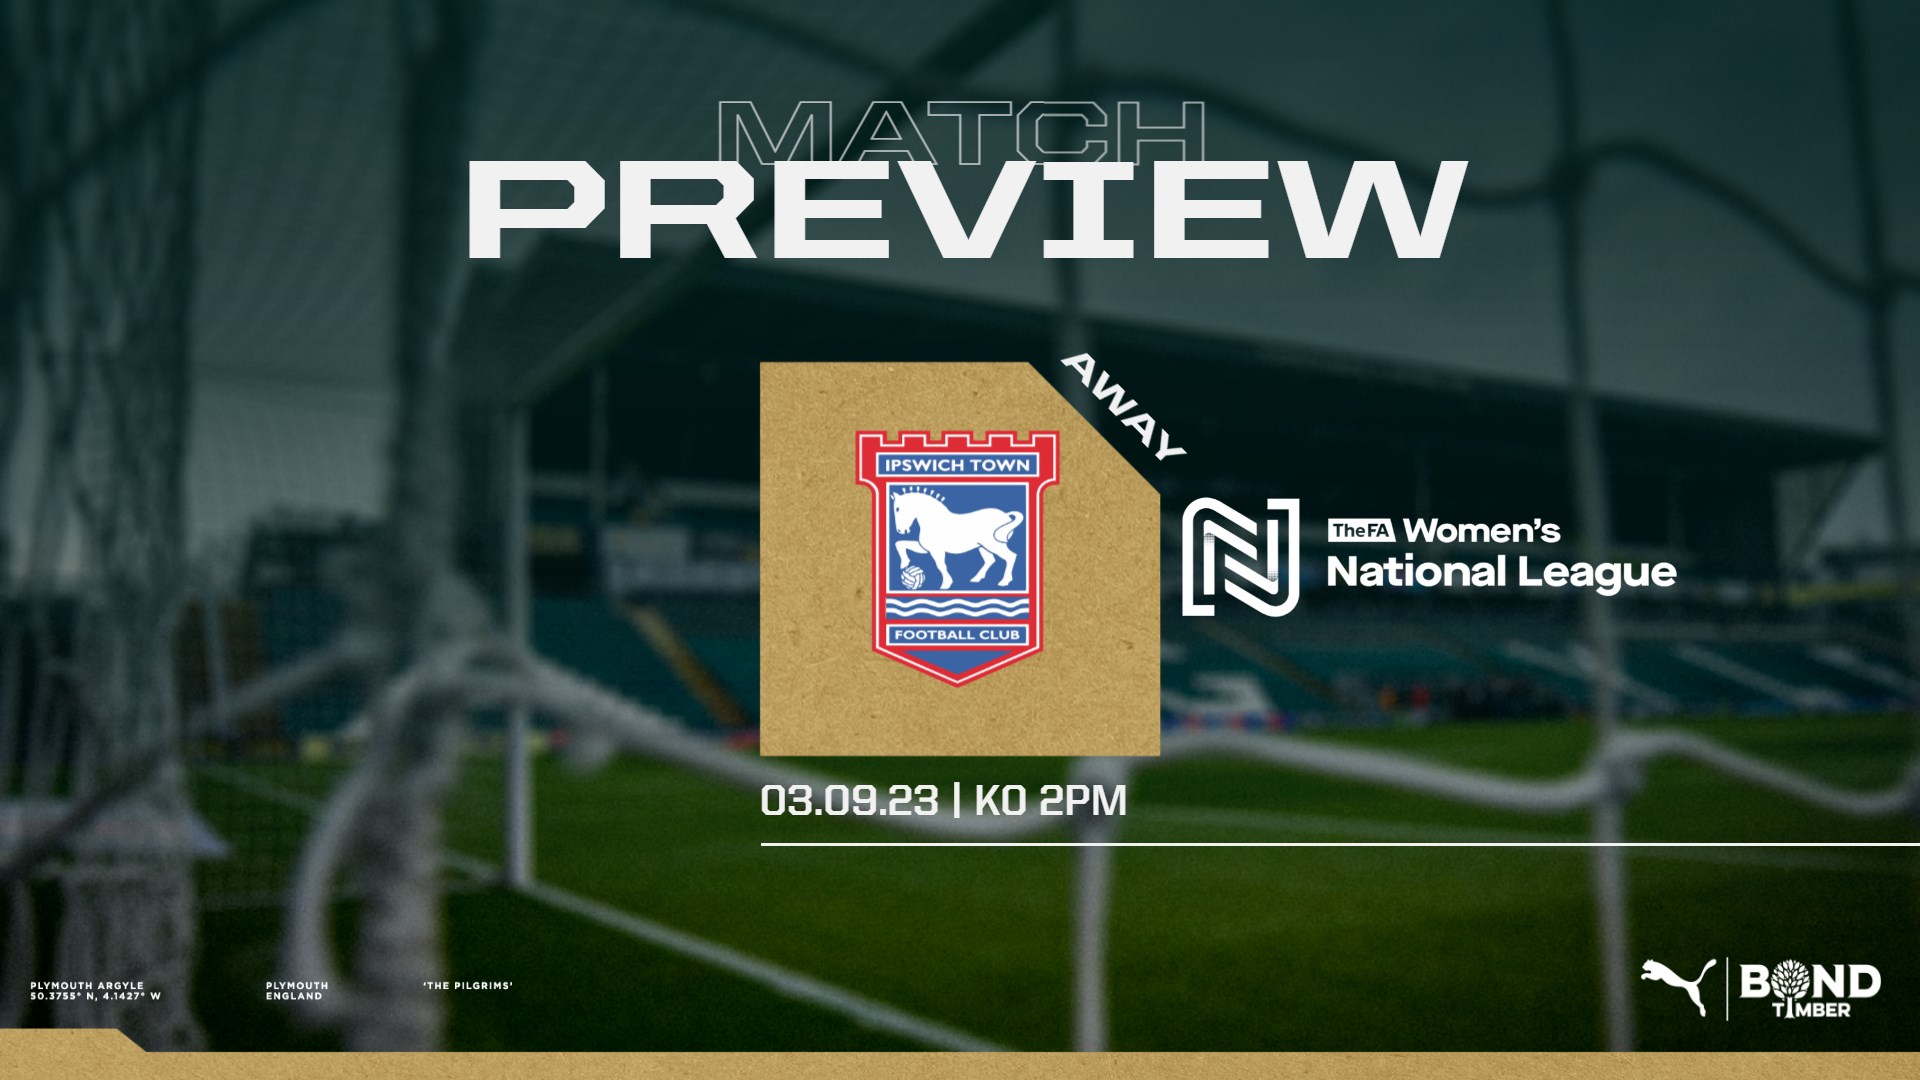 Women's preview v Ipswich town